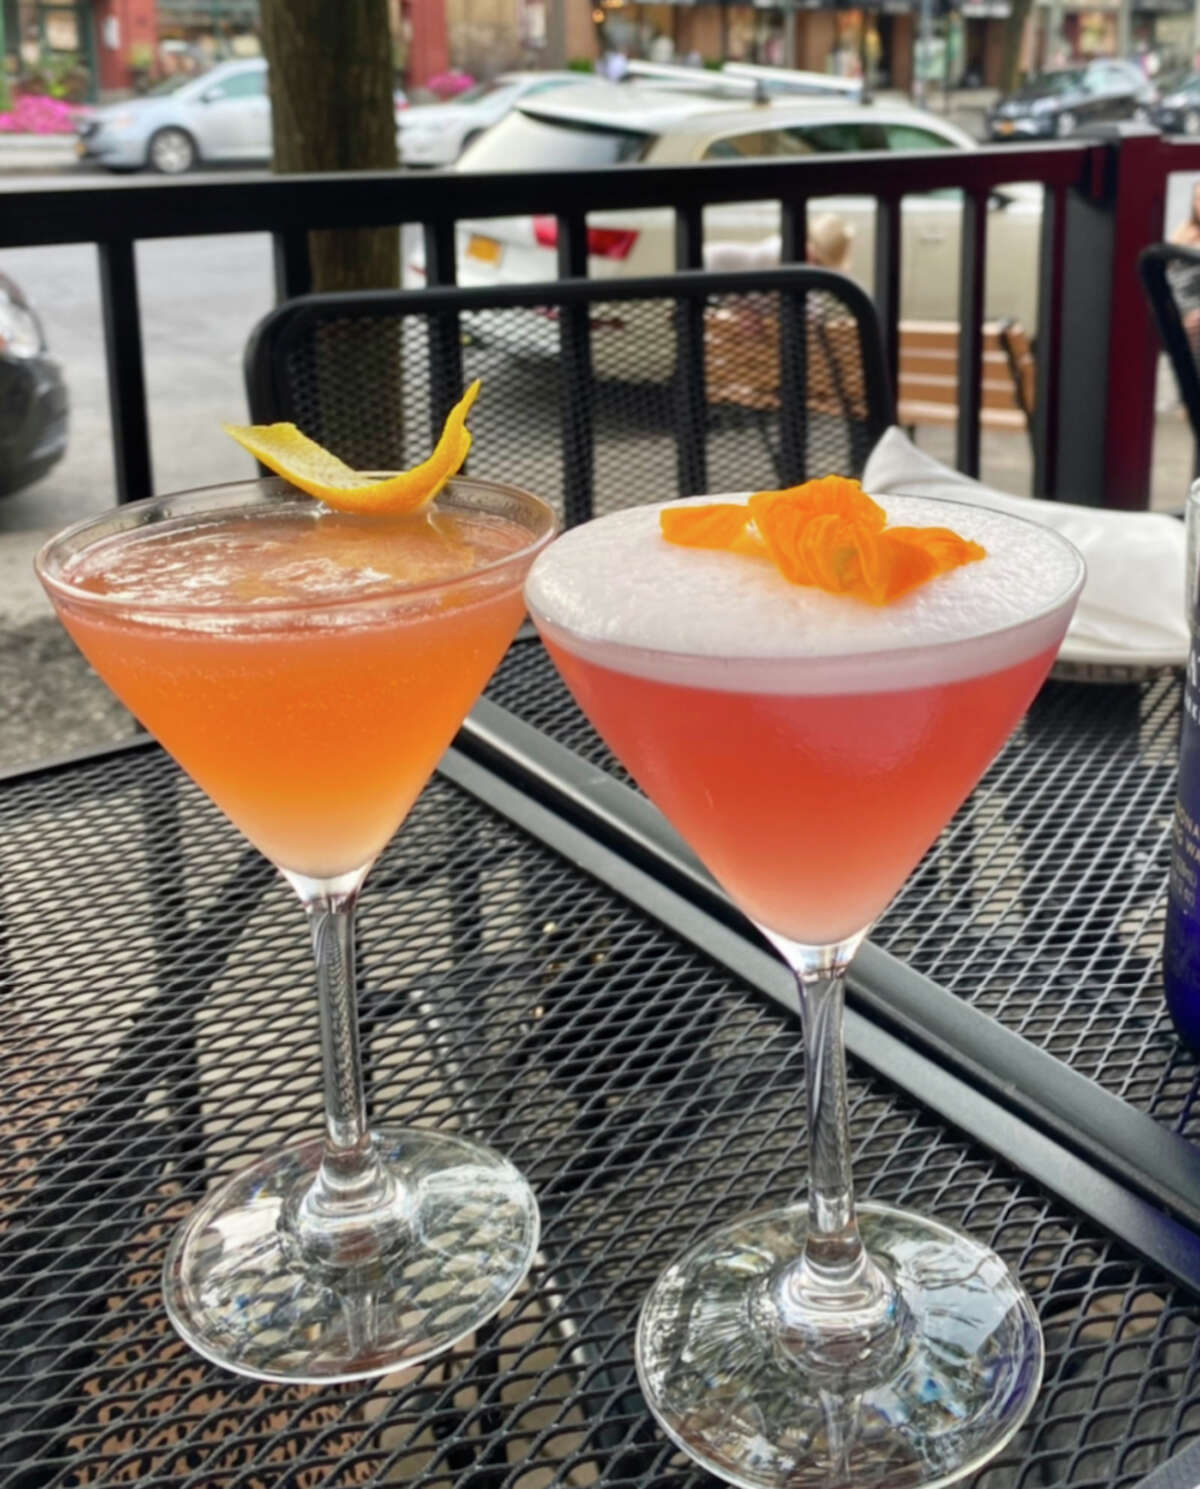 Two cocktails in martini glasses, including the Em’s Gem, on the right.